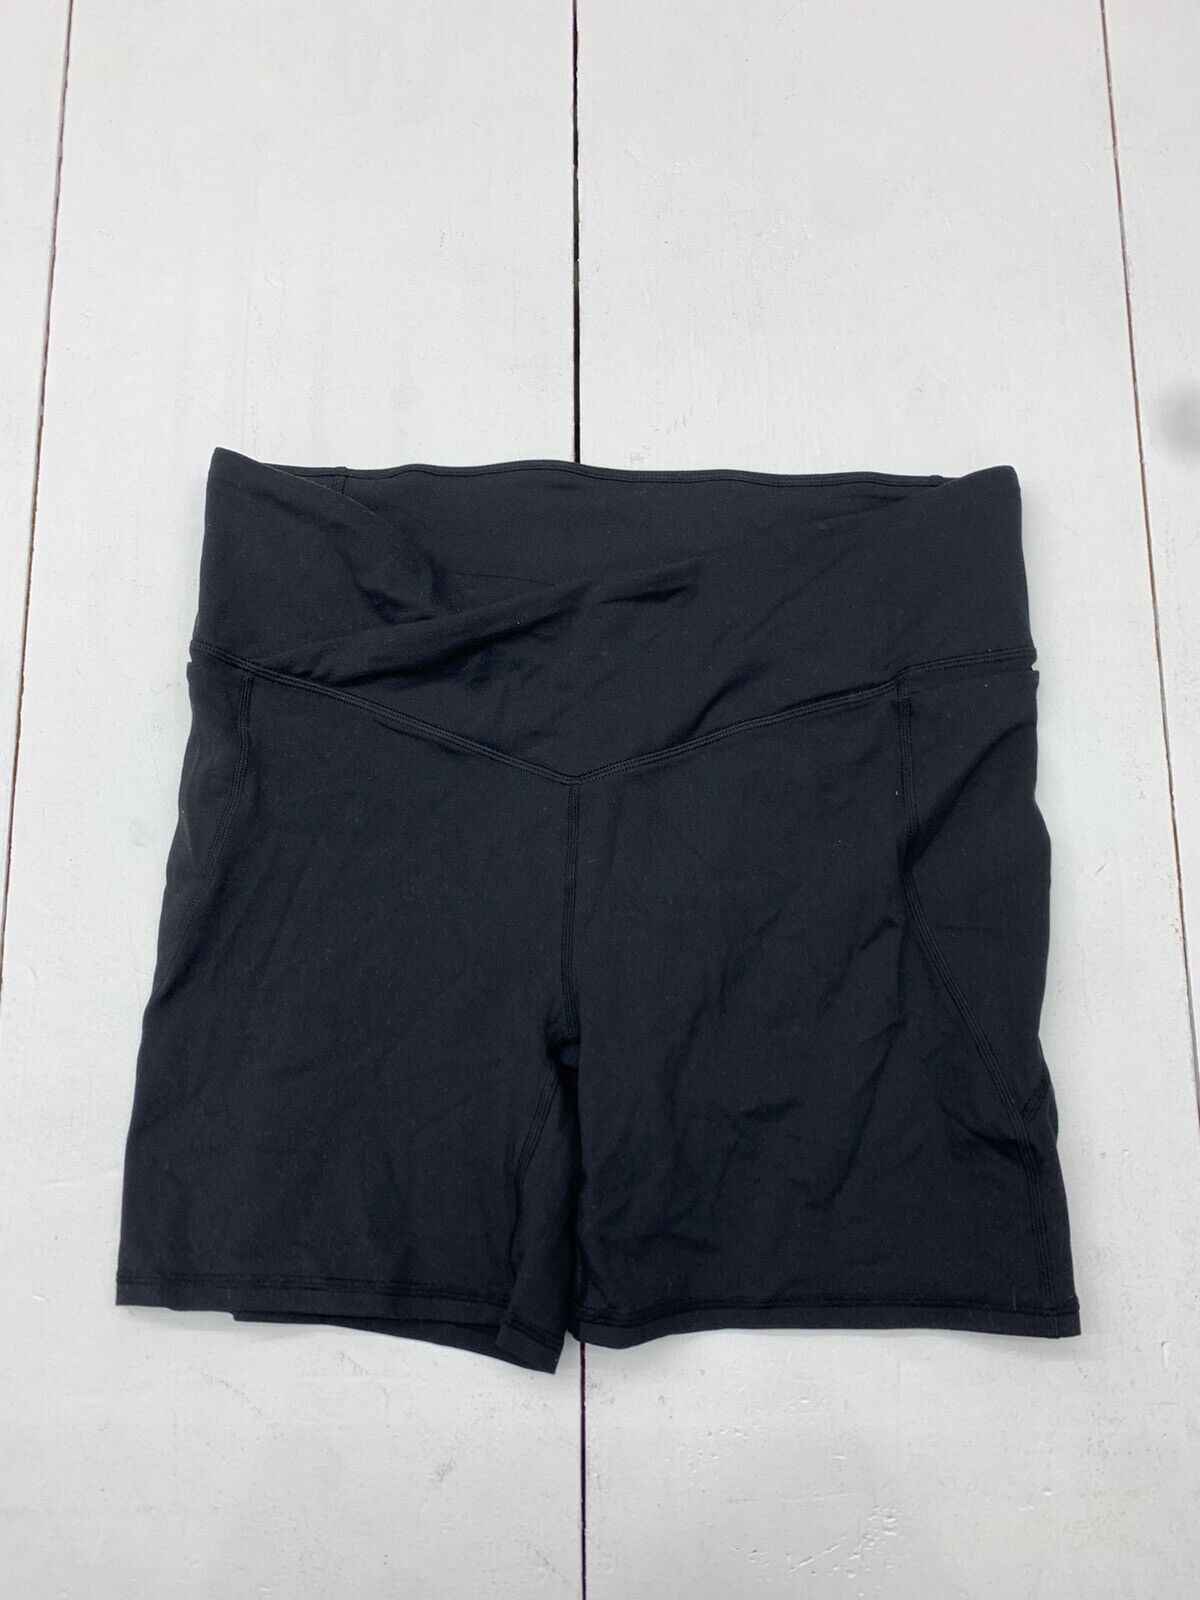 Fabletics Pure Luxe Womens Black Athletic Shorts Size XL - beyond exchange